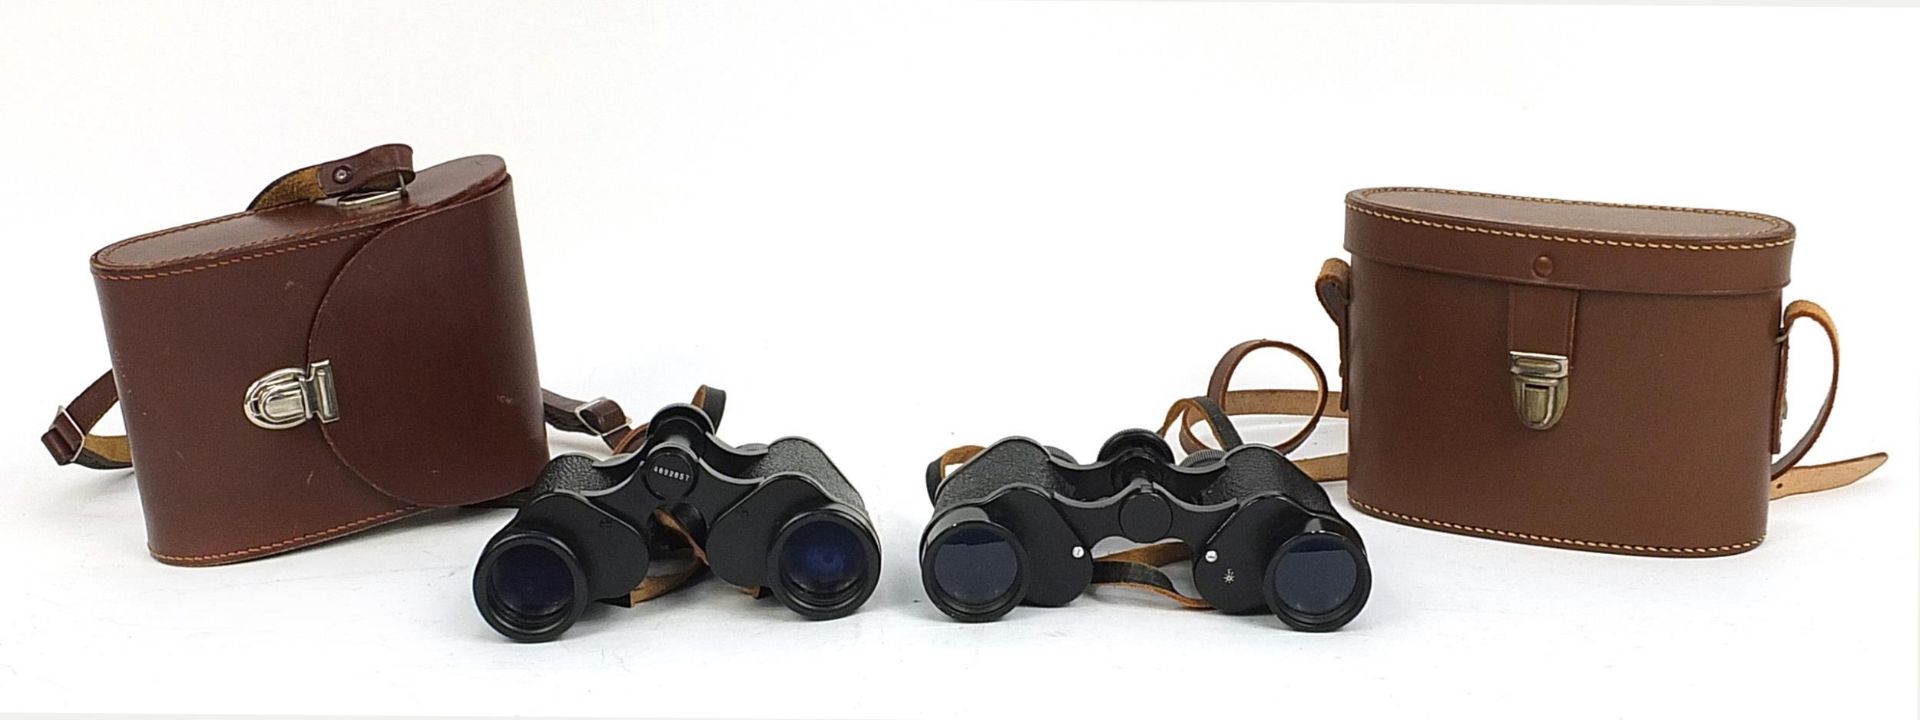 Cased pair of Depees Ltd 8x30 binoculars, London W1 and a pair of Carl Zeiss Jena binoculars with